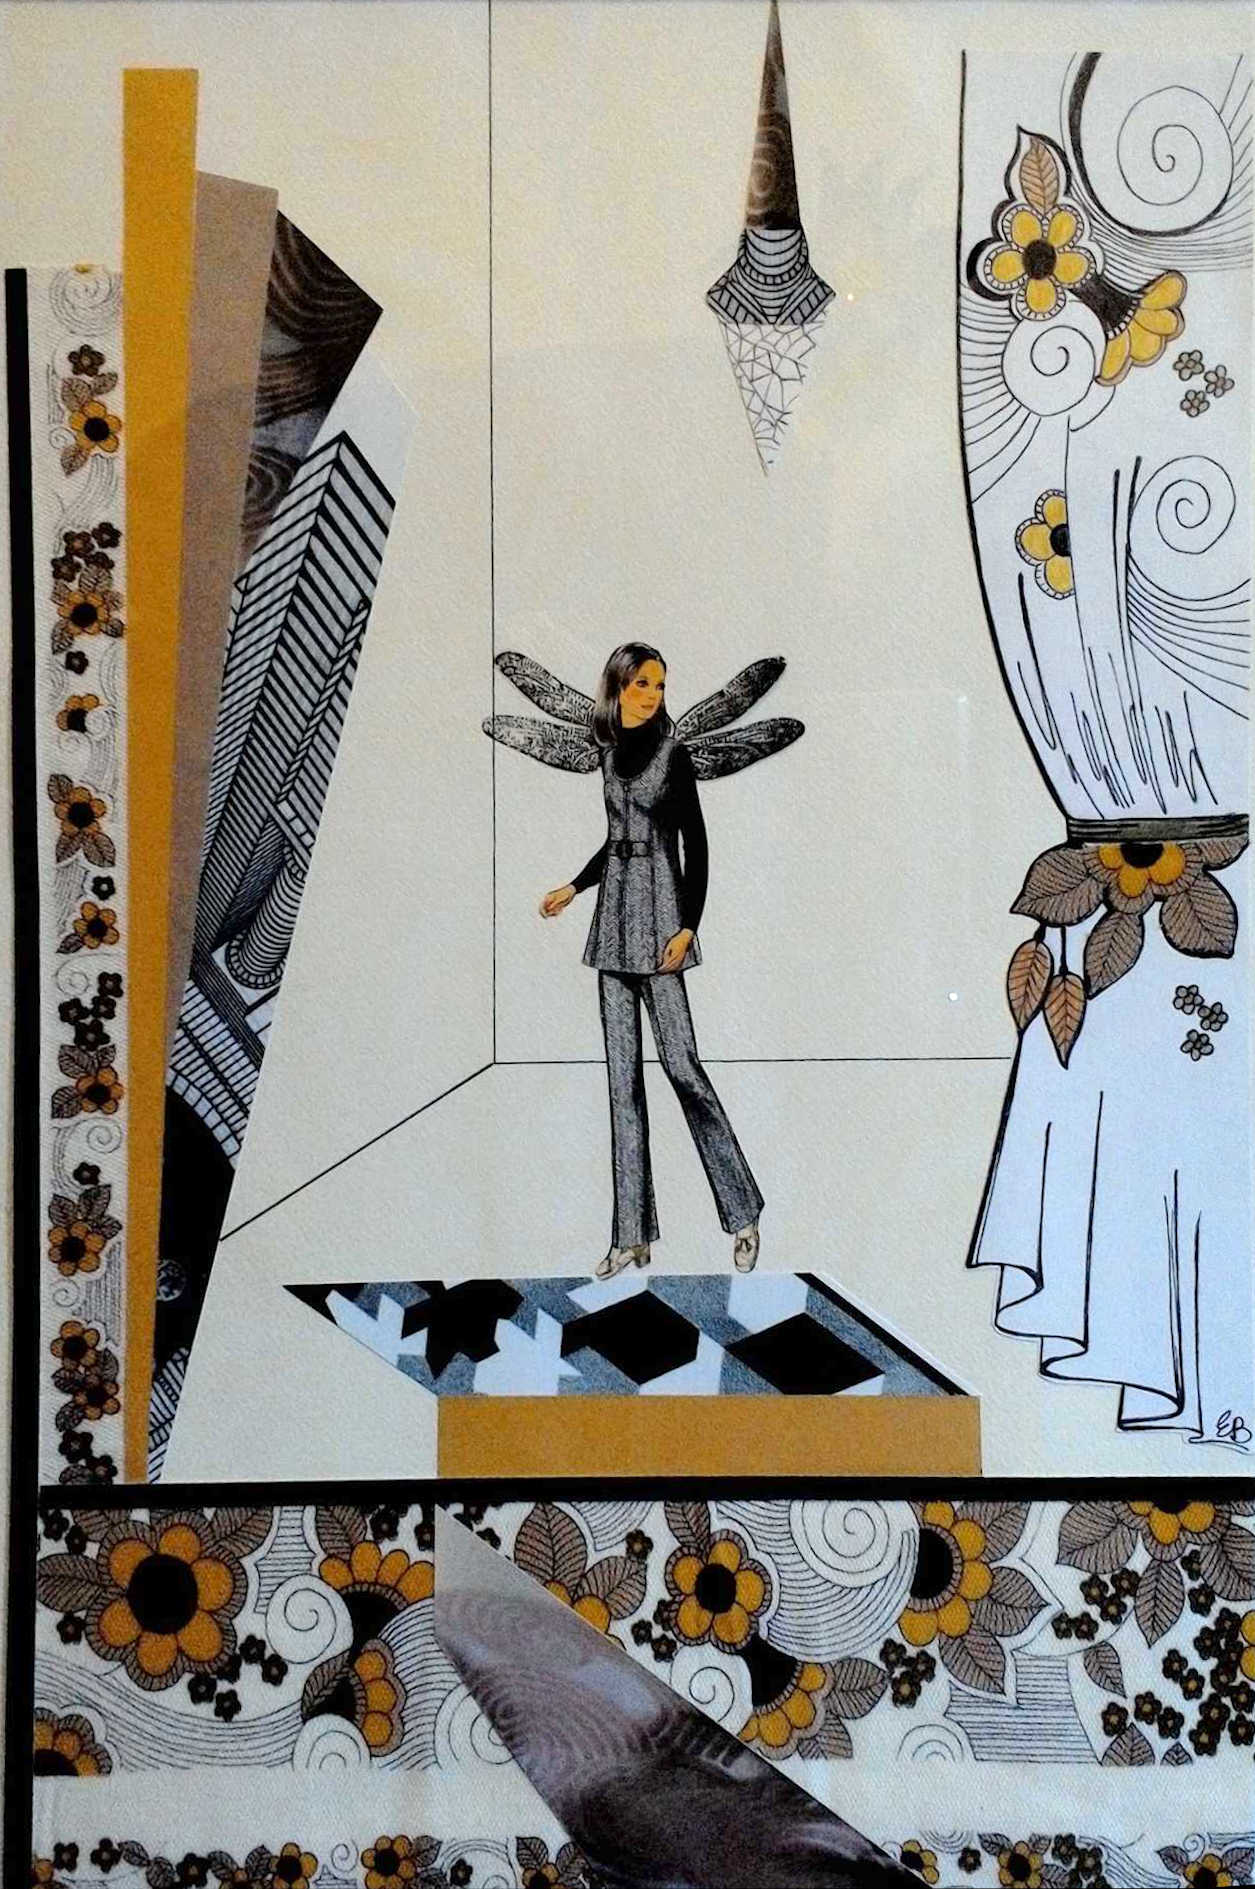 Collage work "Deirdre won an award for stage and set design" by Libby Bloxham. The collage centres on a fashion figure illustration typical of vintage sewing patterns, a woman in 70s style smart casual clothes, with acetate dragonfly wings placed at her shoulders. She stands against a lightly tan-coloured backdrop showing the corner of a room, while around her are arranged swatches of illustrations, vintage paper and fabrics in shapes that describe stage dressing including a gathered curtain and hanging light. The piece uses black and white as base colours, with orange tones featuring strongly in both block colours and patterns.